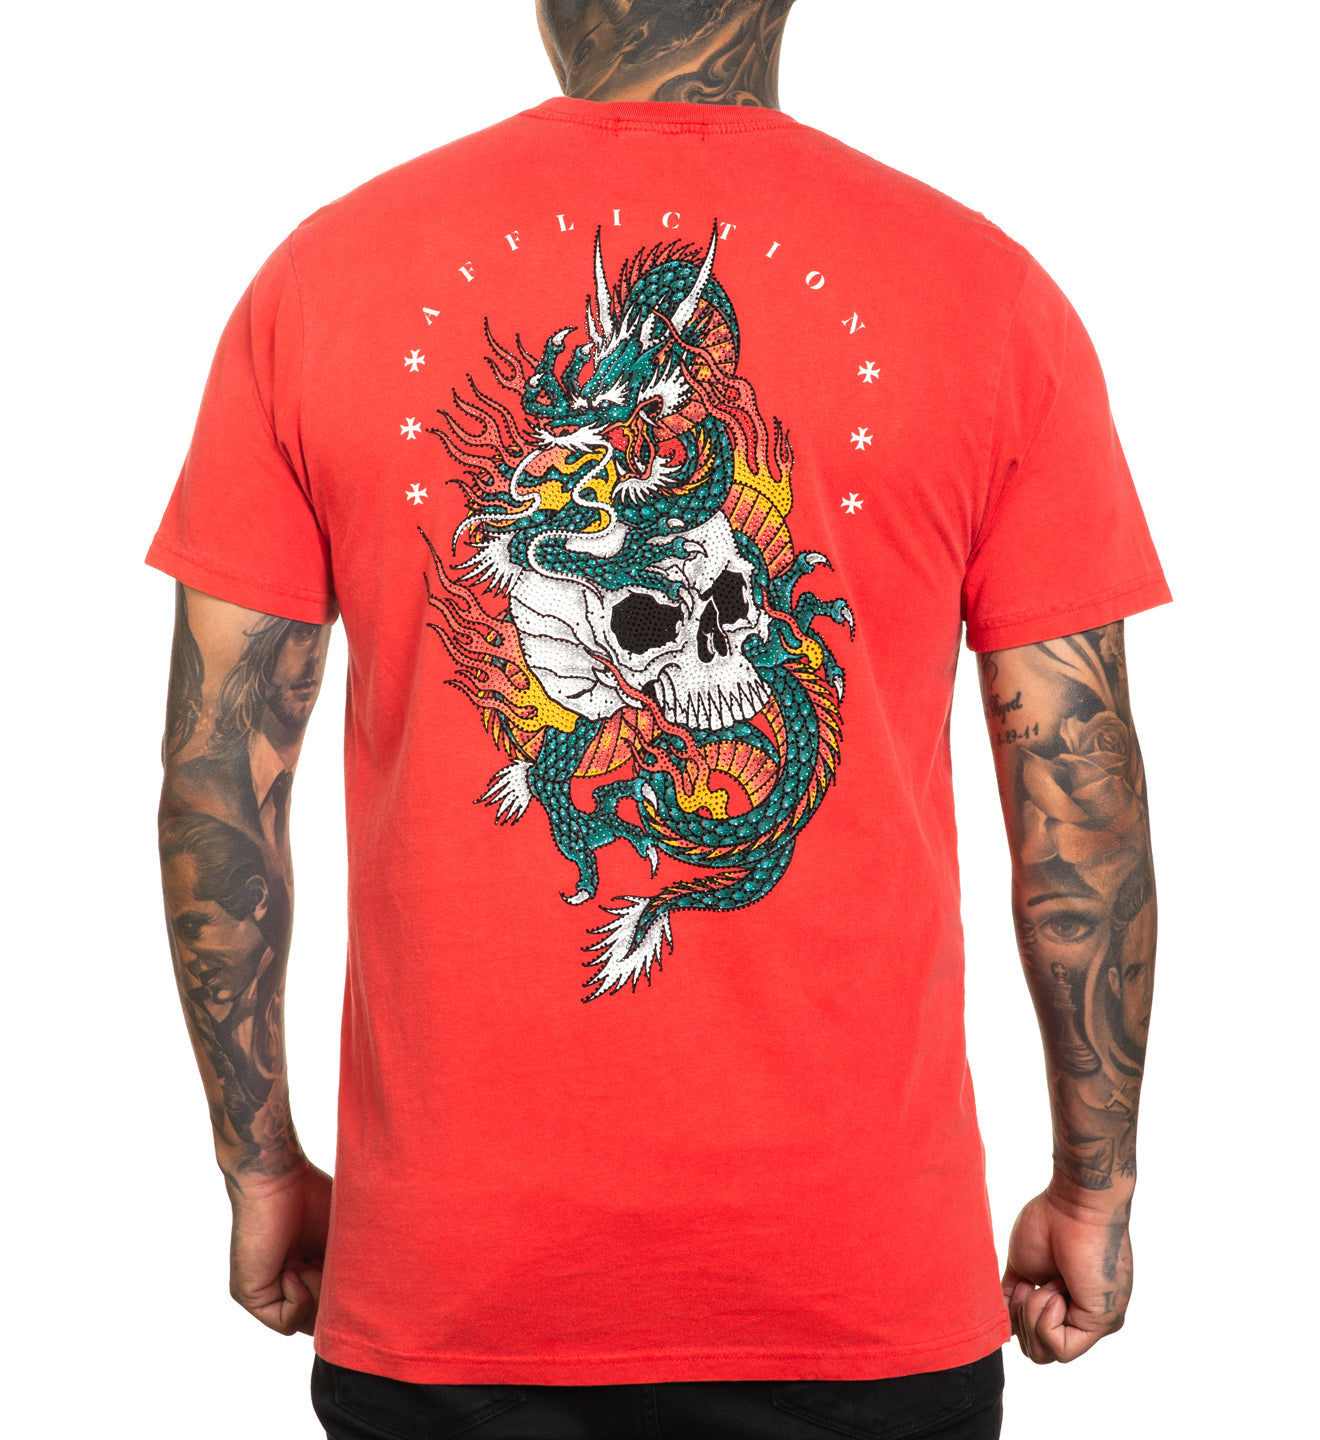 Mens Short Sleeve Tees - Flame & Fable